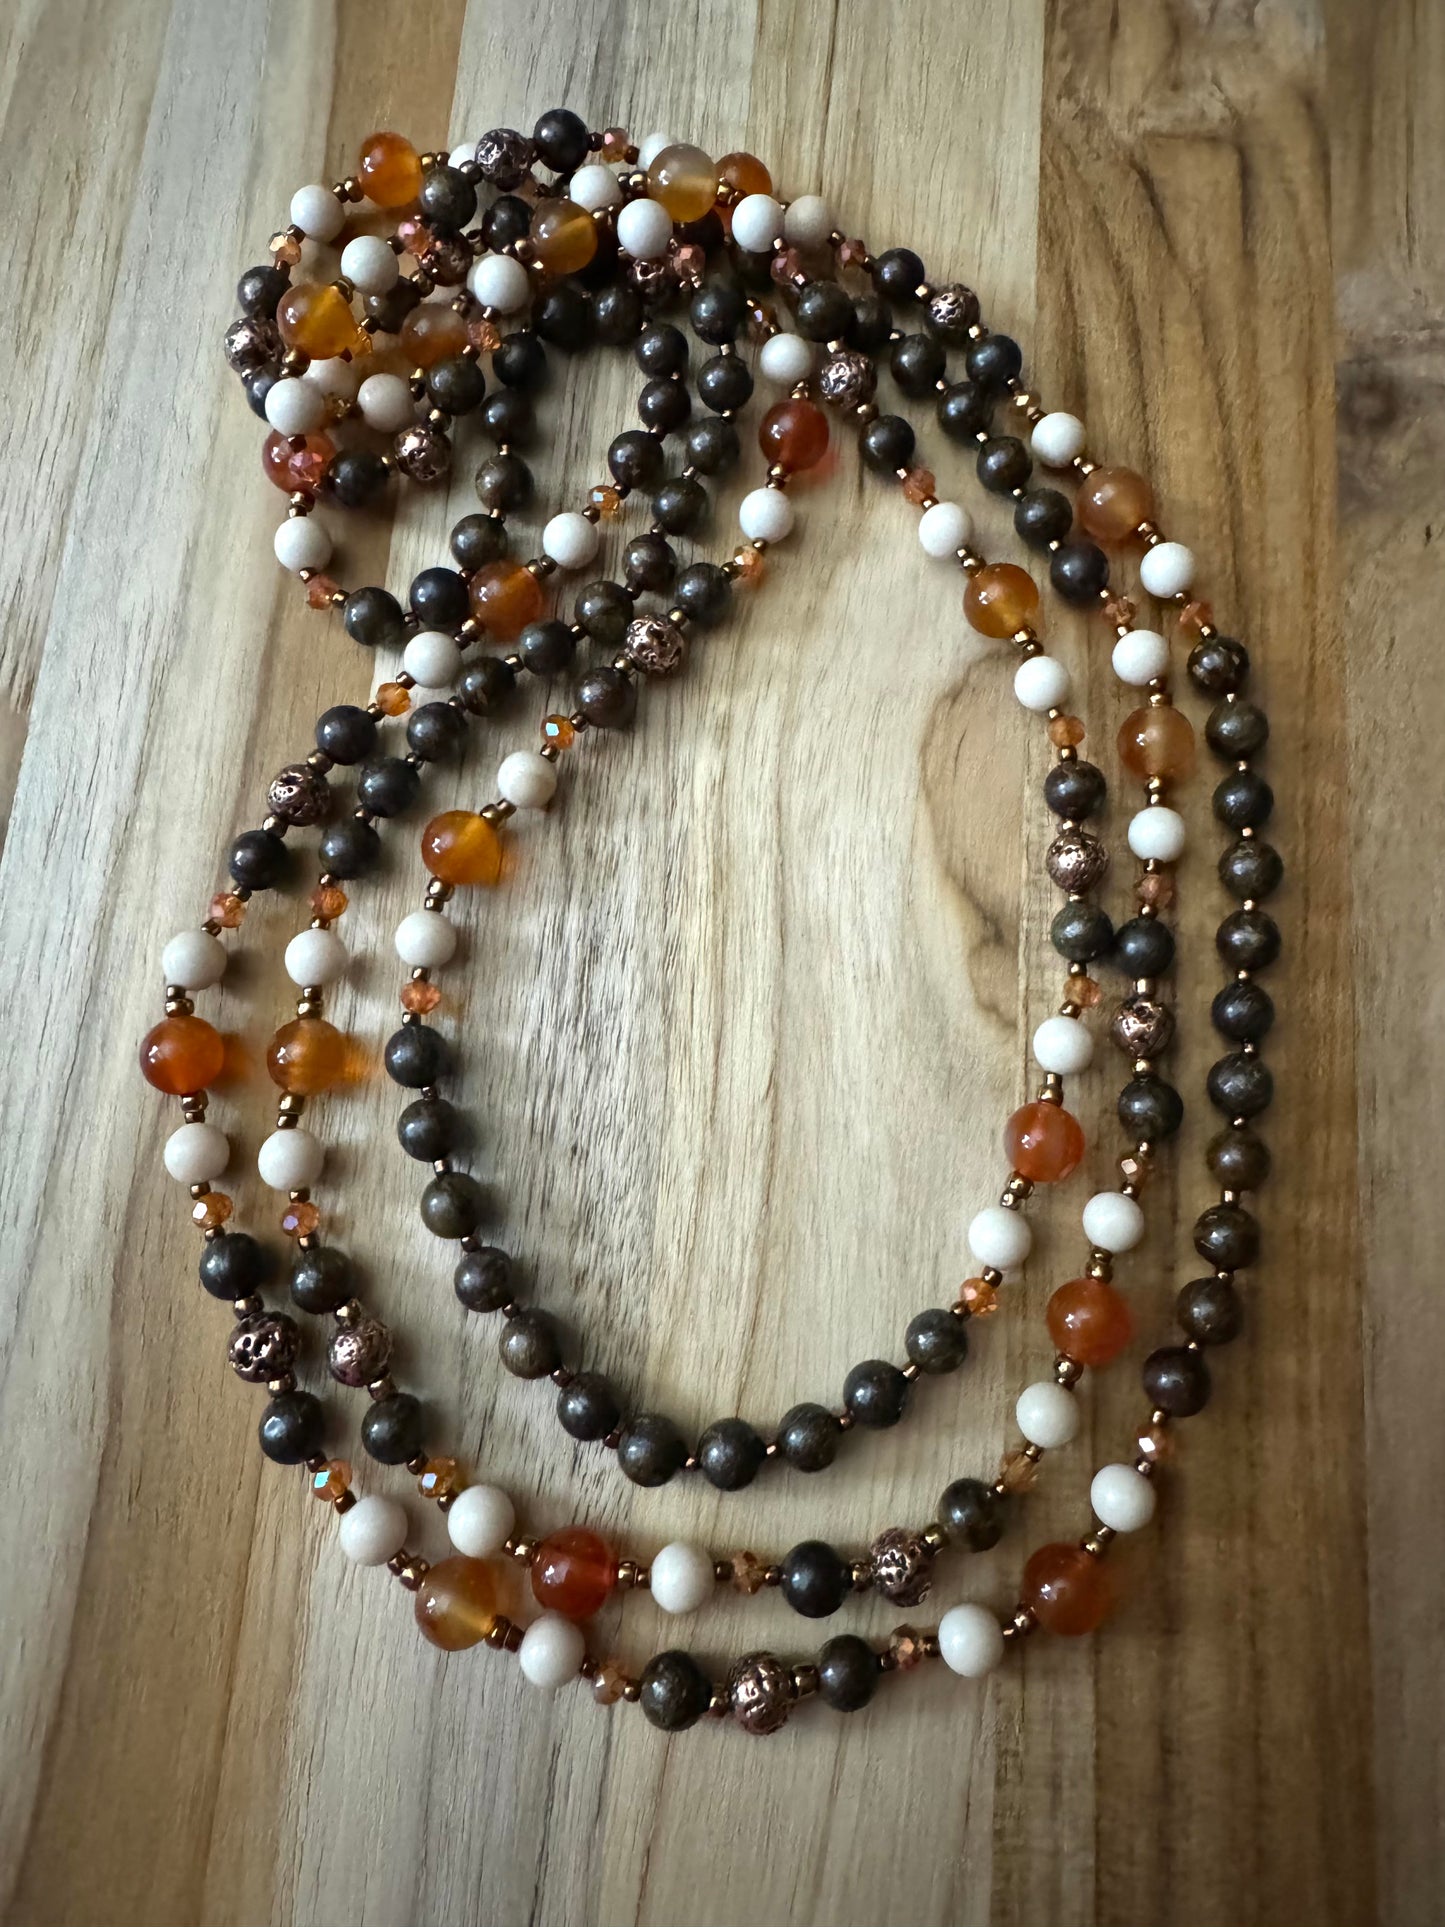 Extra Long Bronzite Beaded Necklace with Orange Agate Riverstone Lava Stone and Crystal Beads - My Urban Gems